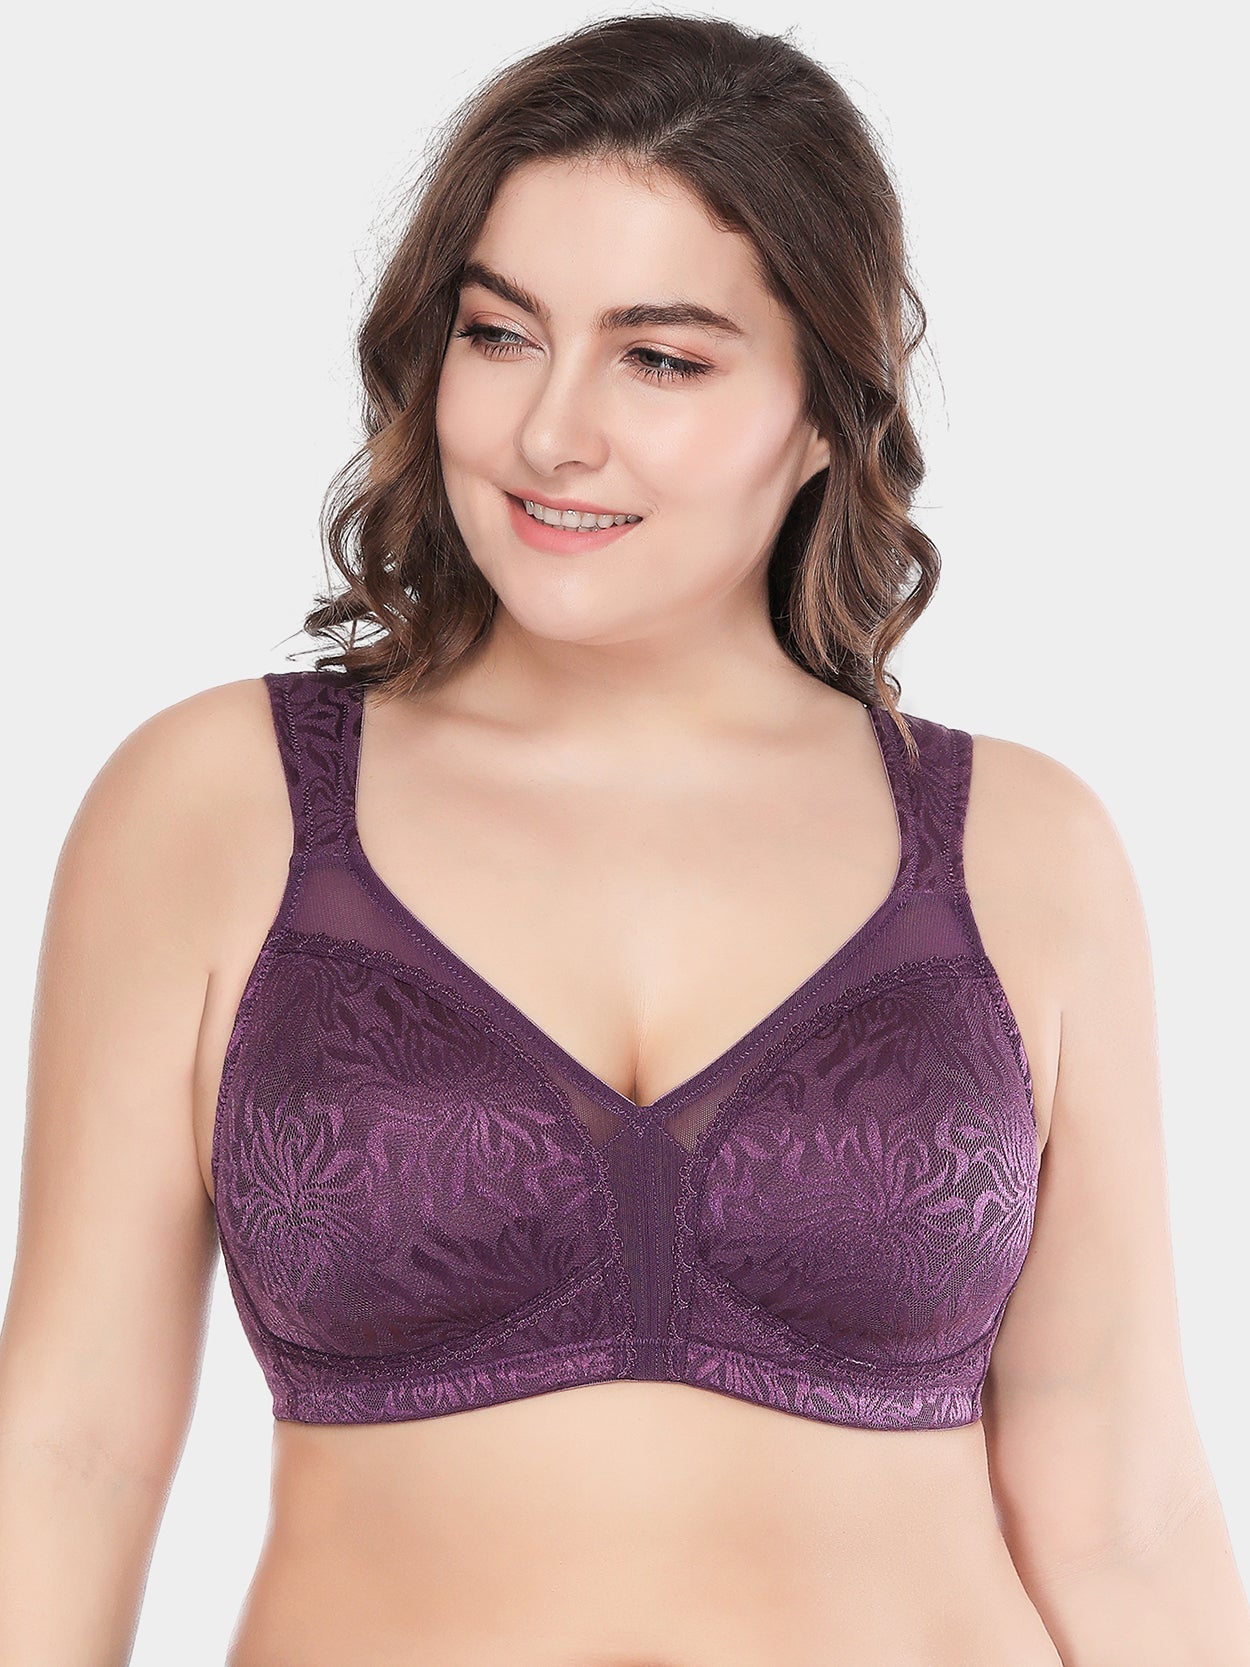 Women's Cotton Full Coverage Wirefree Non-padded Lace Plus Size Bra 48DD